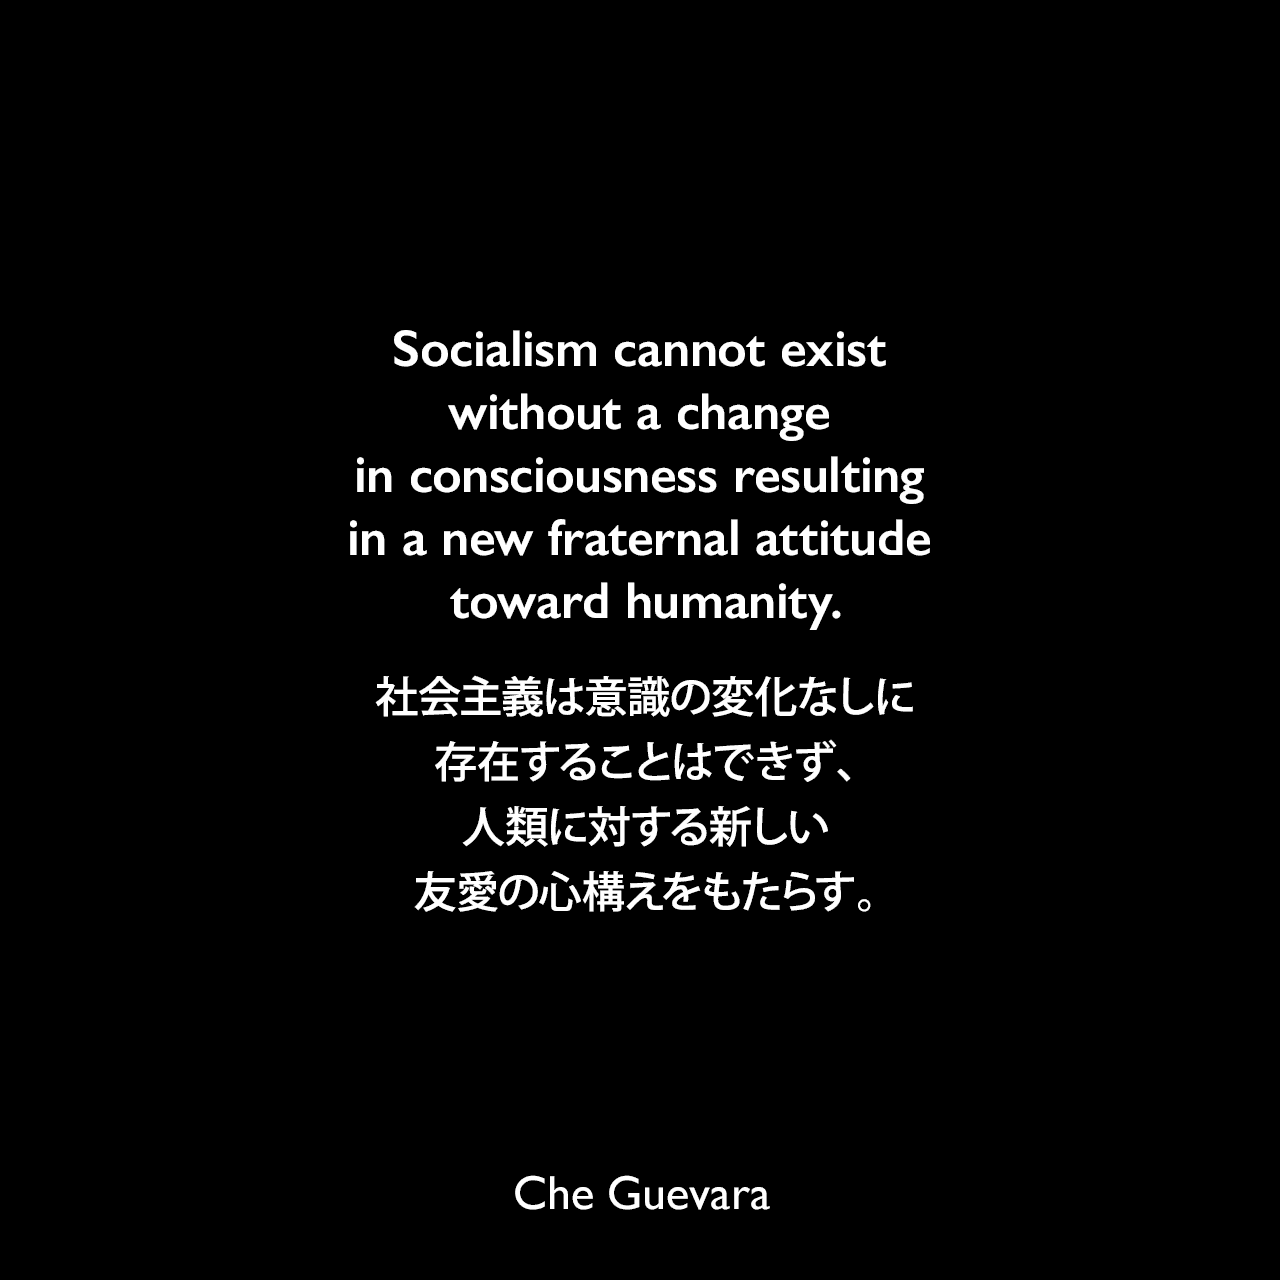 Socialism cannot exist without a change in consciousness resulting in a new fraternal attitude toward humanity.社会主義は意識の変化なしに存在することはできず、人類に対する新しい友愛の心構えをもたらす。- 1965年2月24日 アジア・アフリカ会議でのスピーチよりChe Guevara